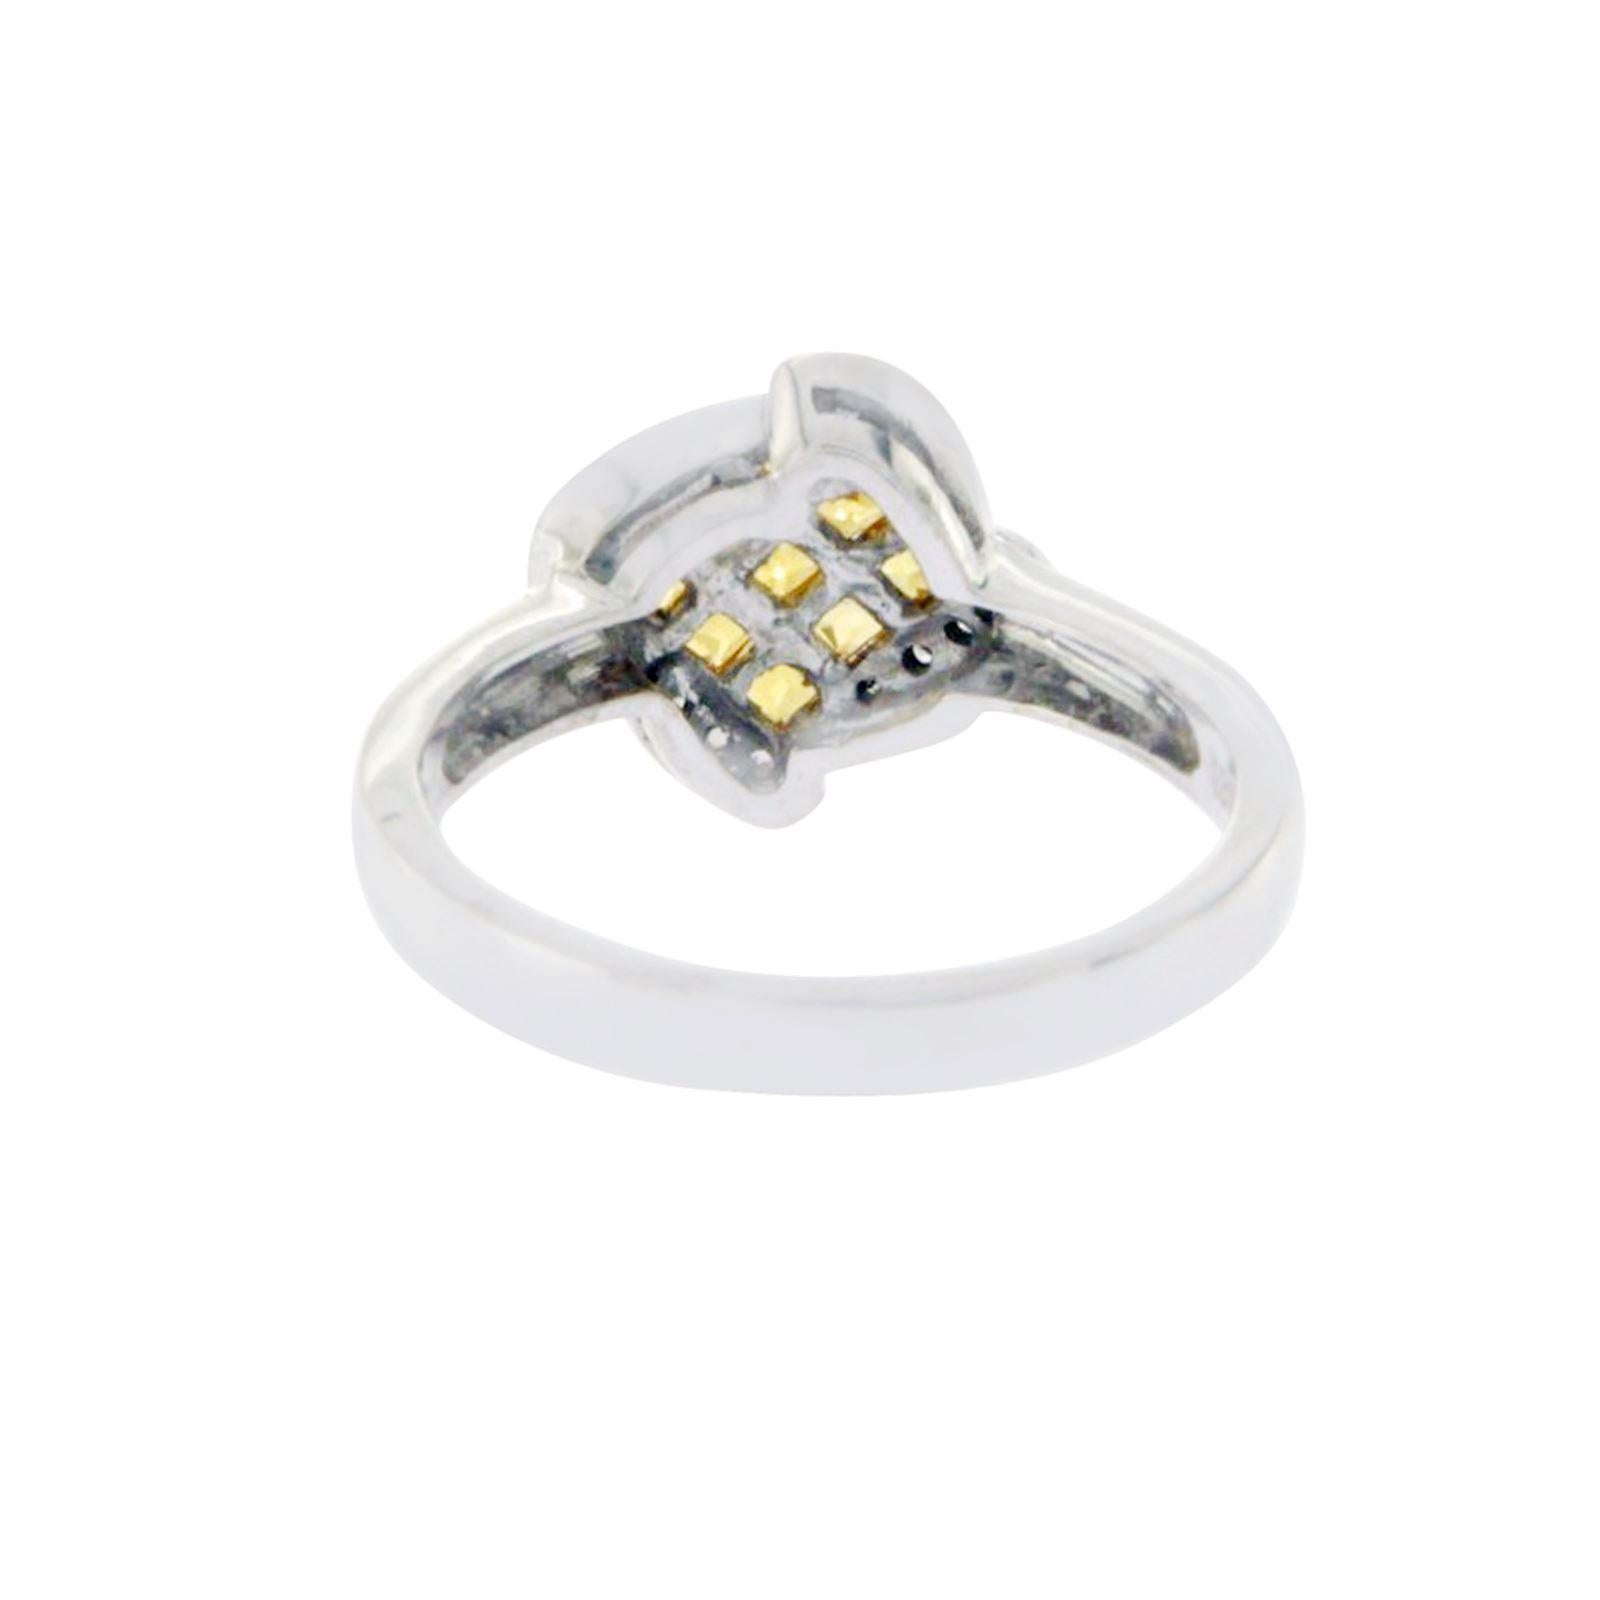 0.12 Carat Round Diamonds and 1.02 Yellow Sapphire 18 Karat Gold Flower Ring In New Condition For Sale In Los Angeles, CA